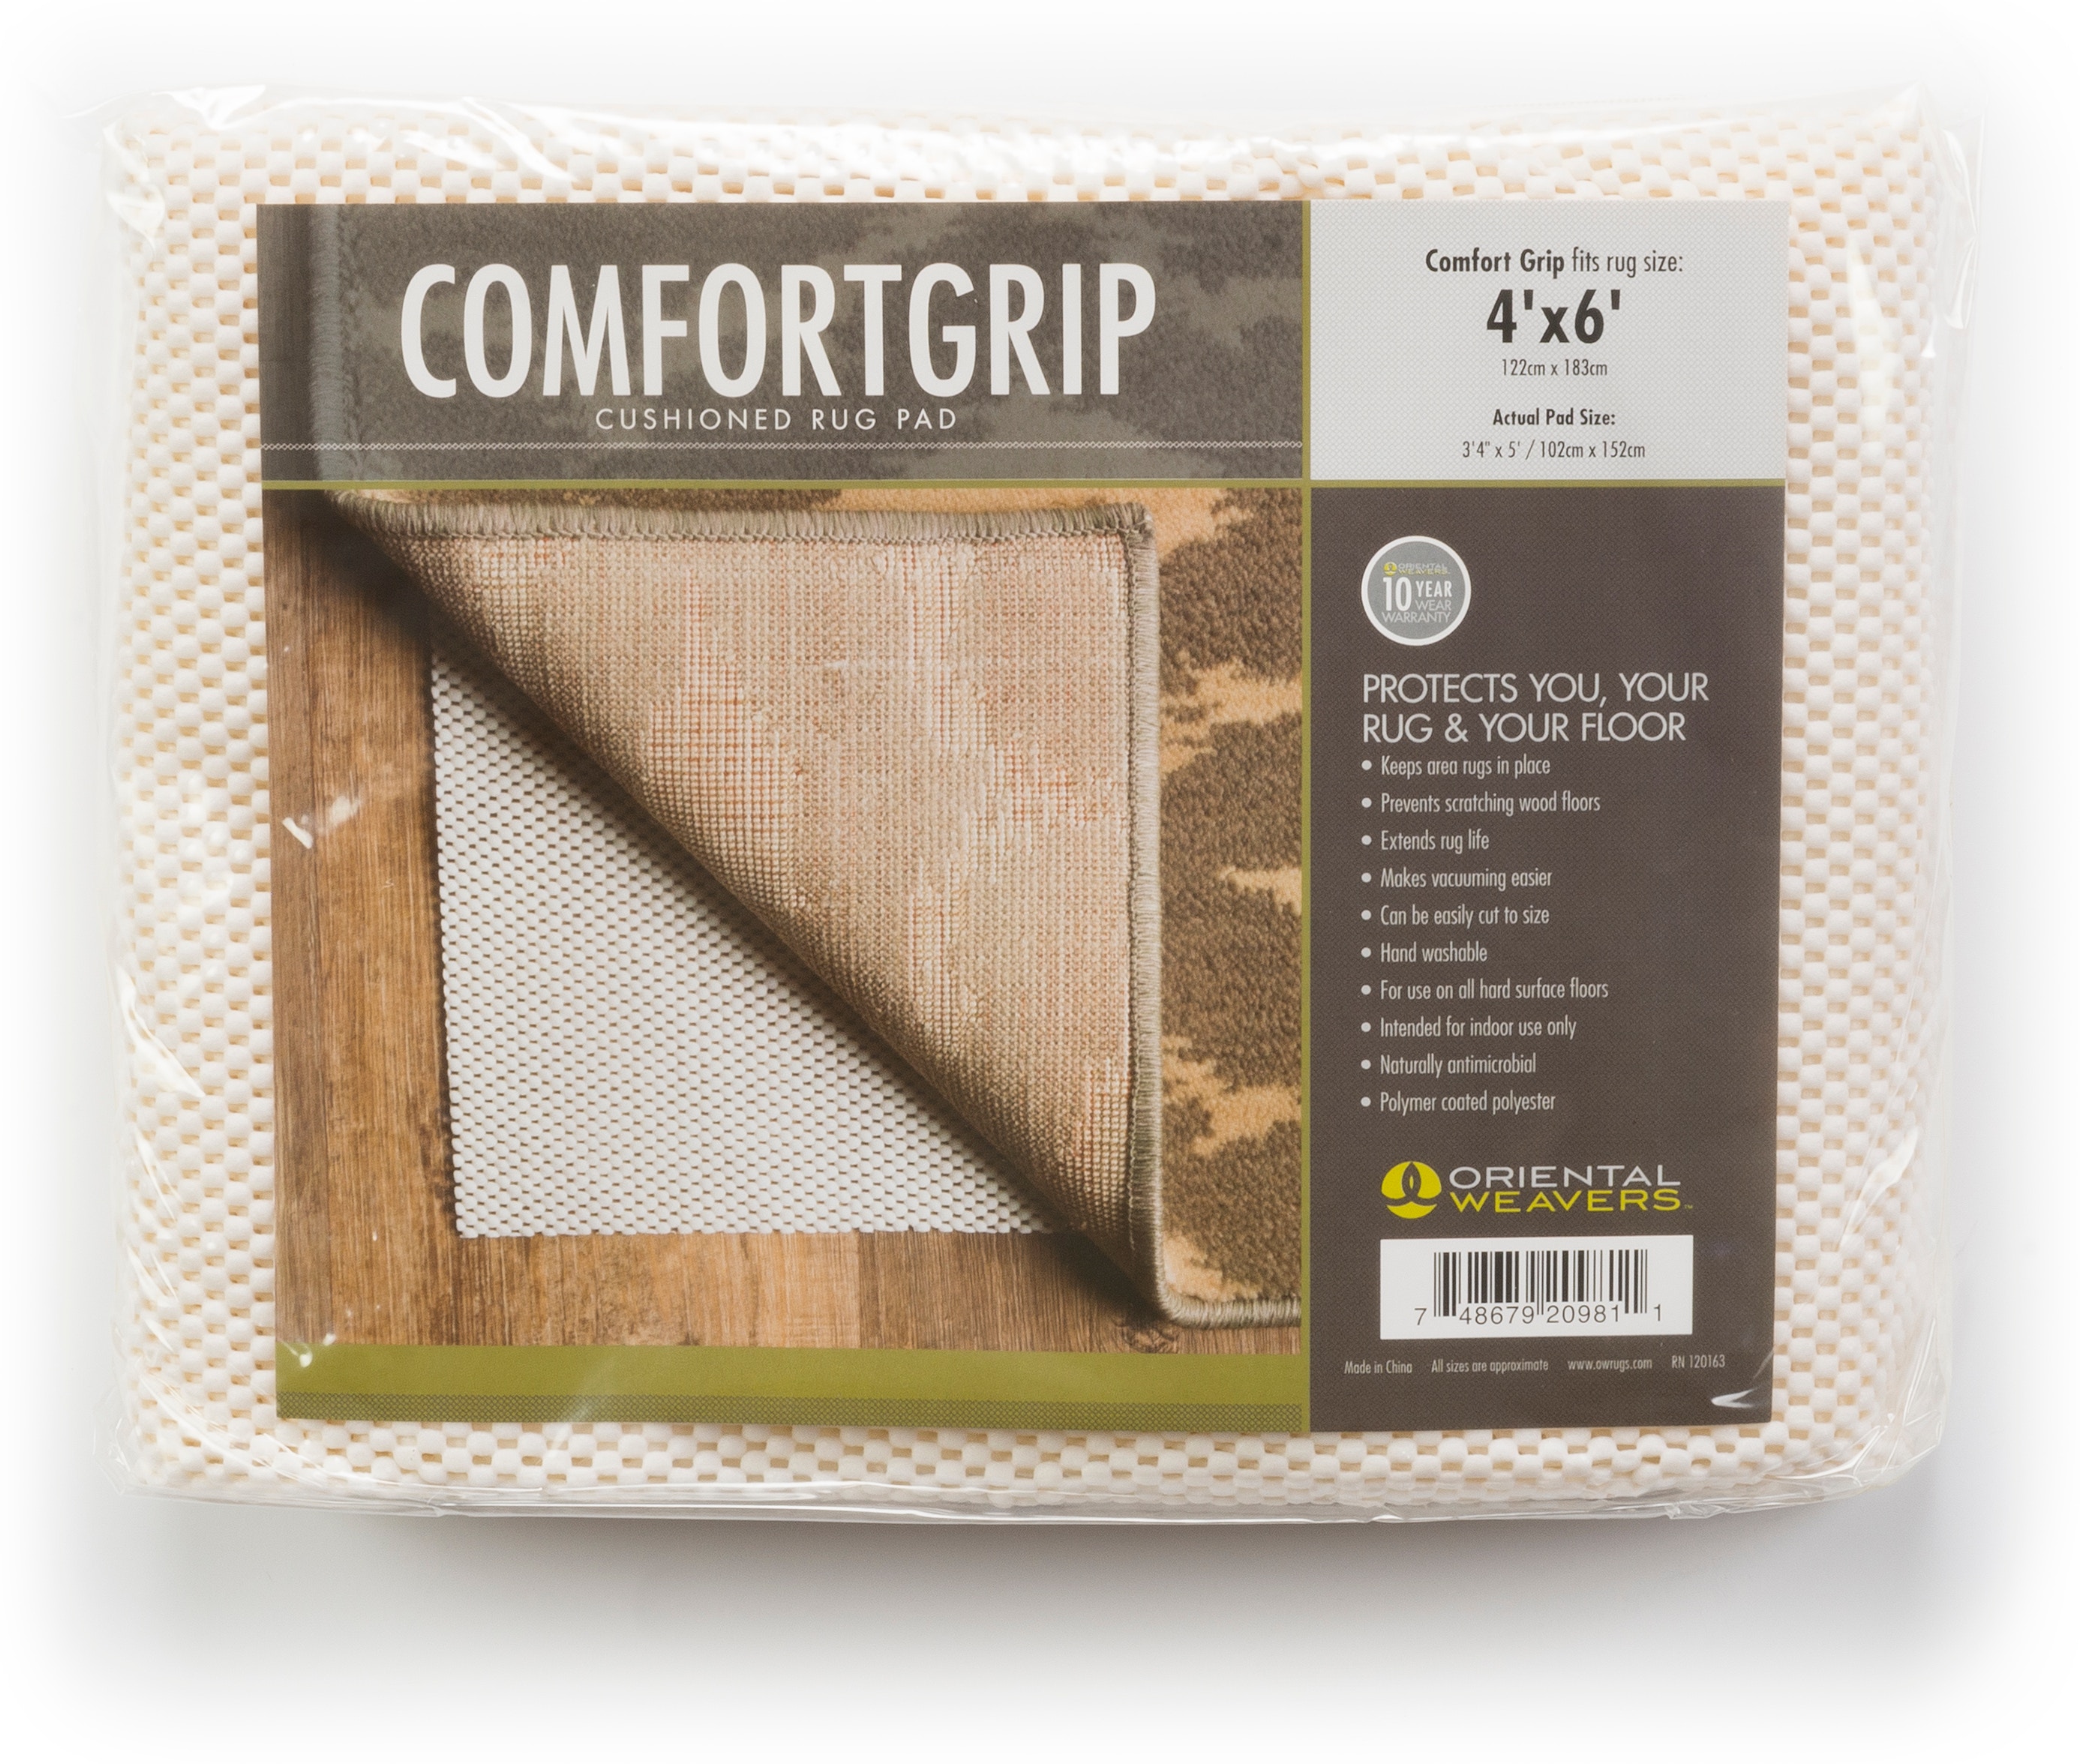 Cushioned Rug Pads with Comfort Grip